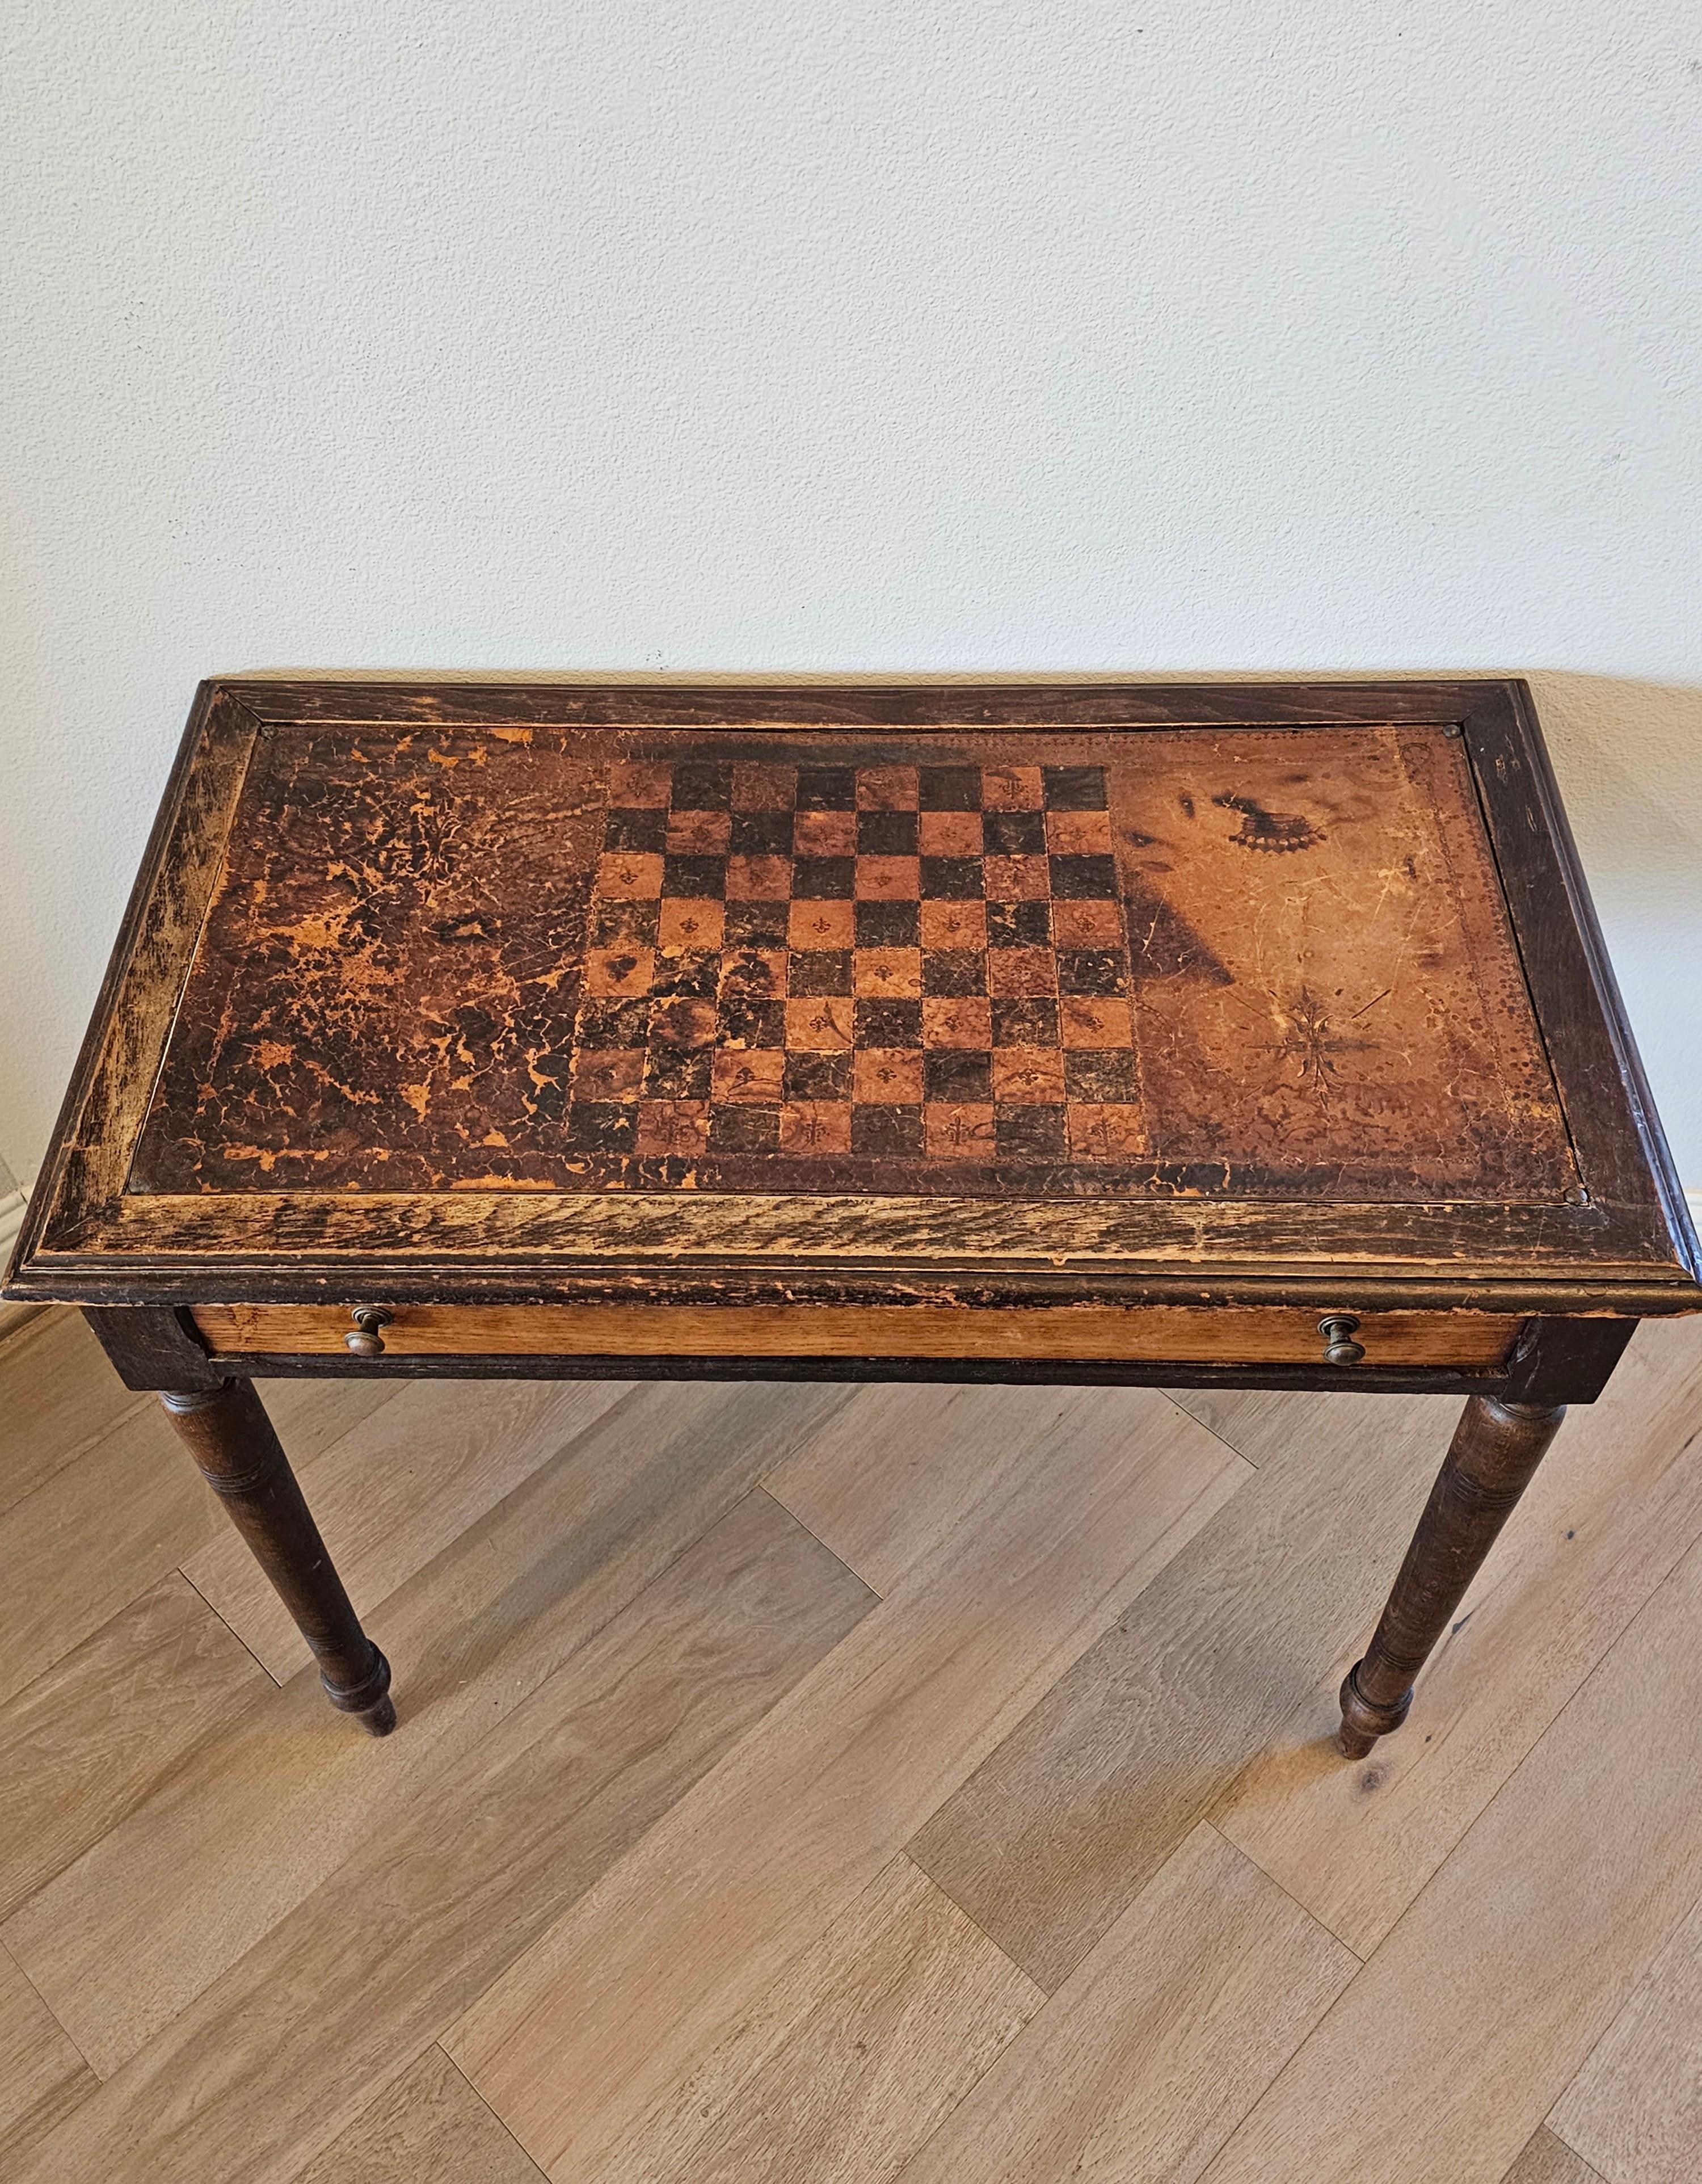 Add authentic old world European character and charm with this distinctive antique writing table / games table with beautifully aged warm rustic heavily distressed patina. 

Born in Continental Europe in the 19th century, hand-crafted of solid pine